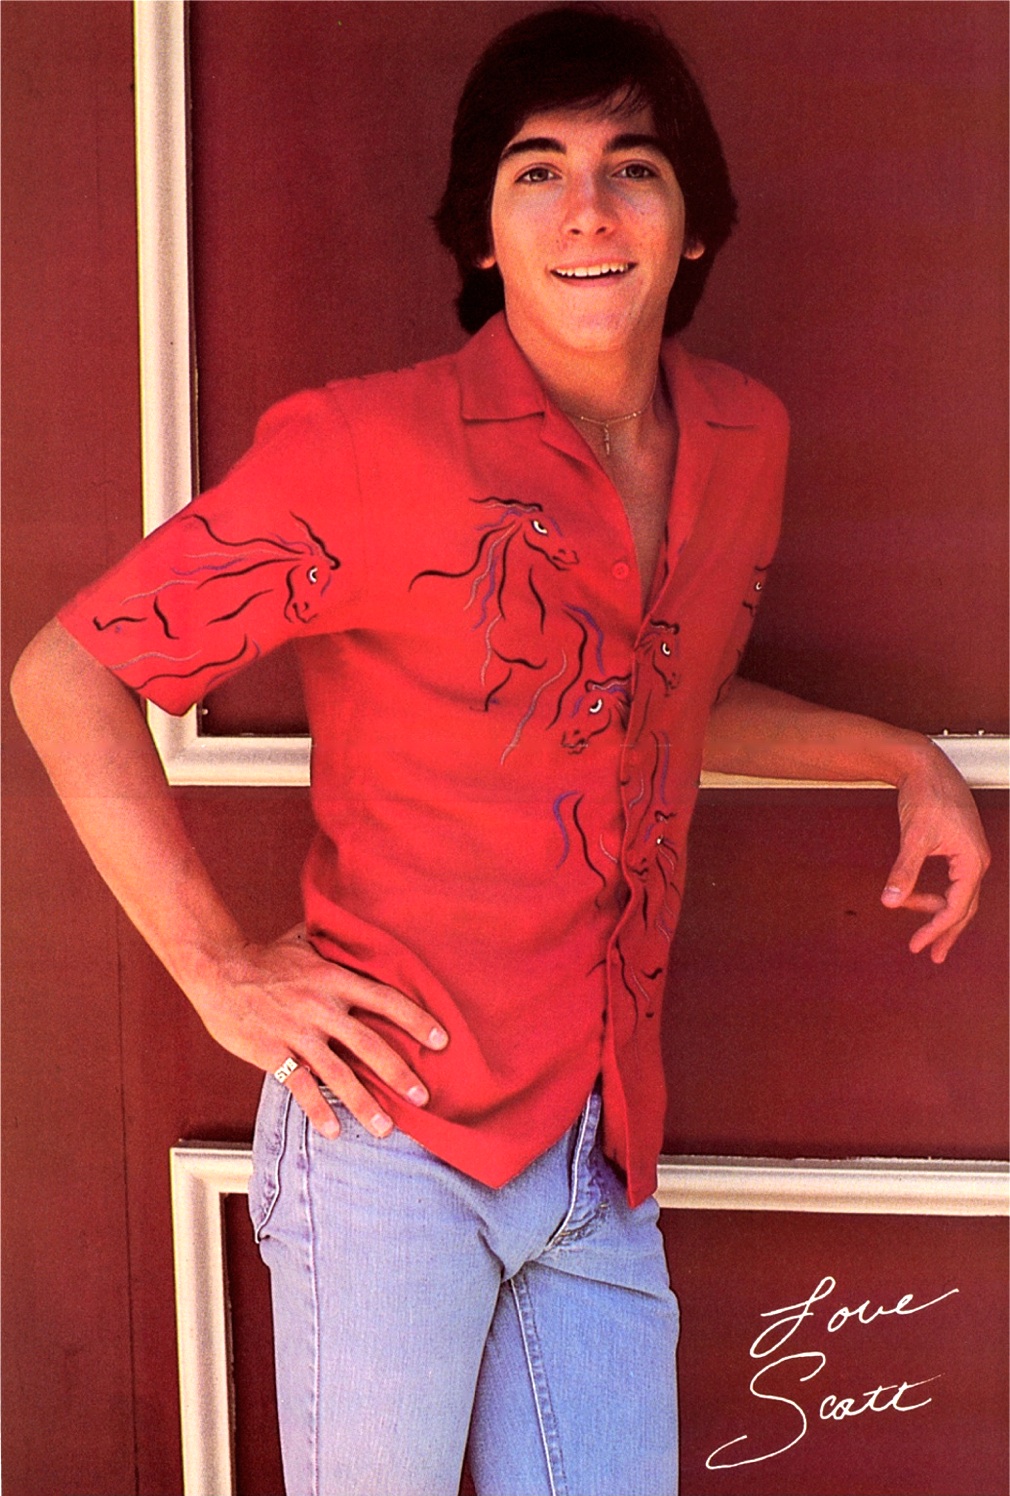 General picture of Scott Baio - Photo 6 of 58. 